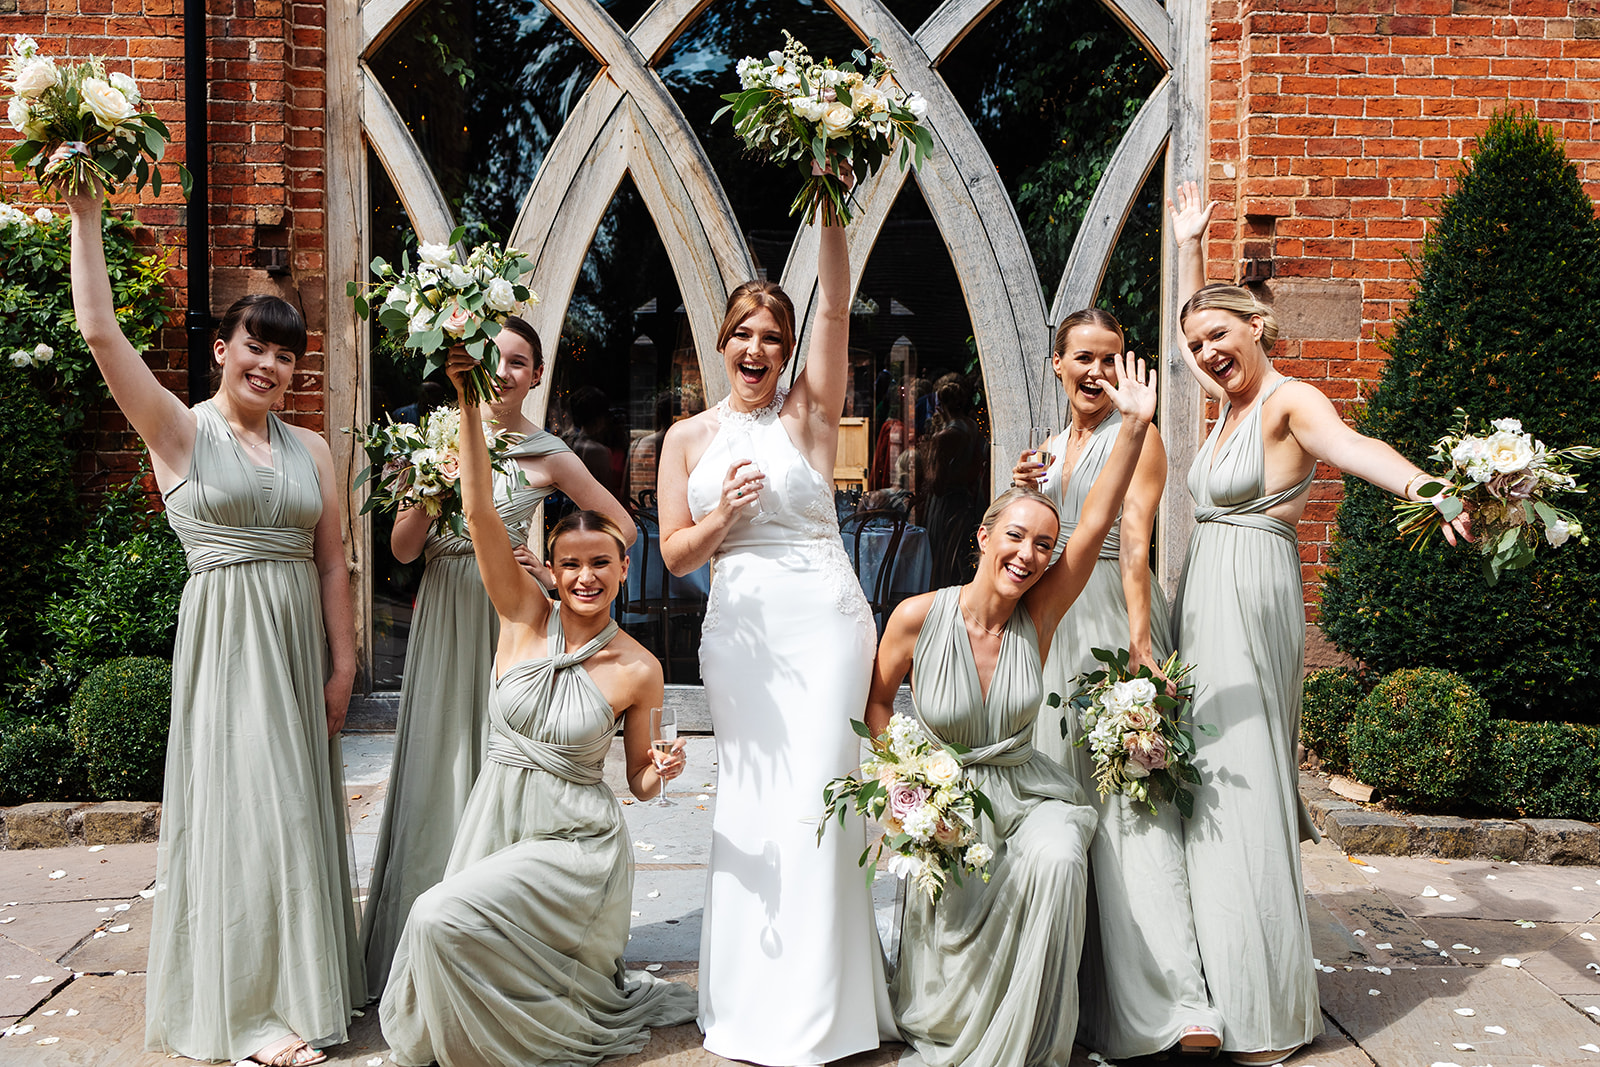 Bride and bridesmaids (in sage green dresses) holding up bouquets and laughing outside ceremony space